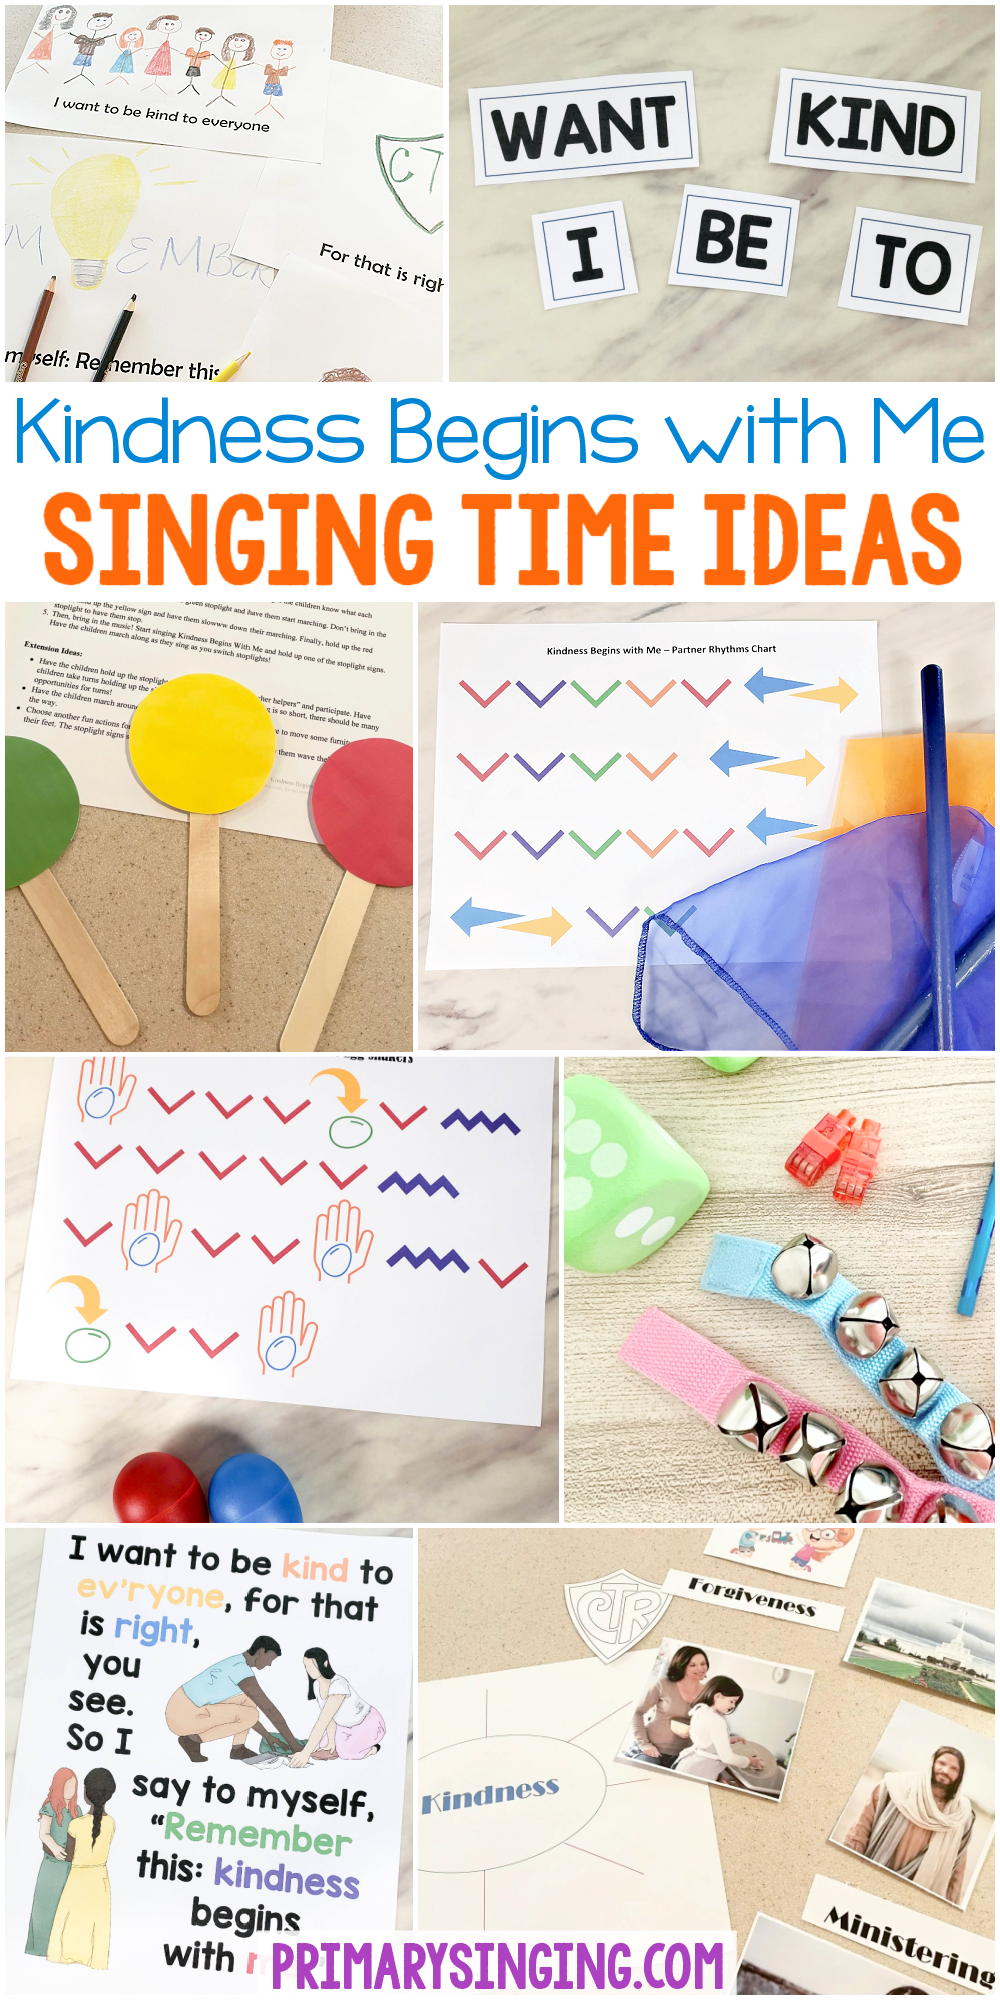 Kindness Begins with Me Singing Time Ideas including stoplight singing, word map, draw the song, unscramble words, partner rhythms and more! Fun ideas for LDS Primary Music leaders and printable song helps.